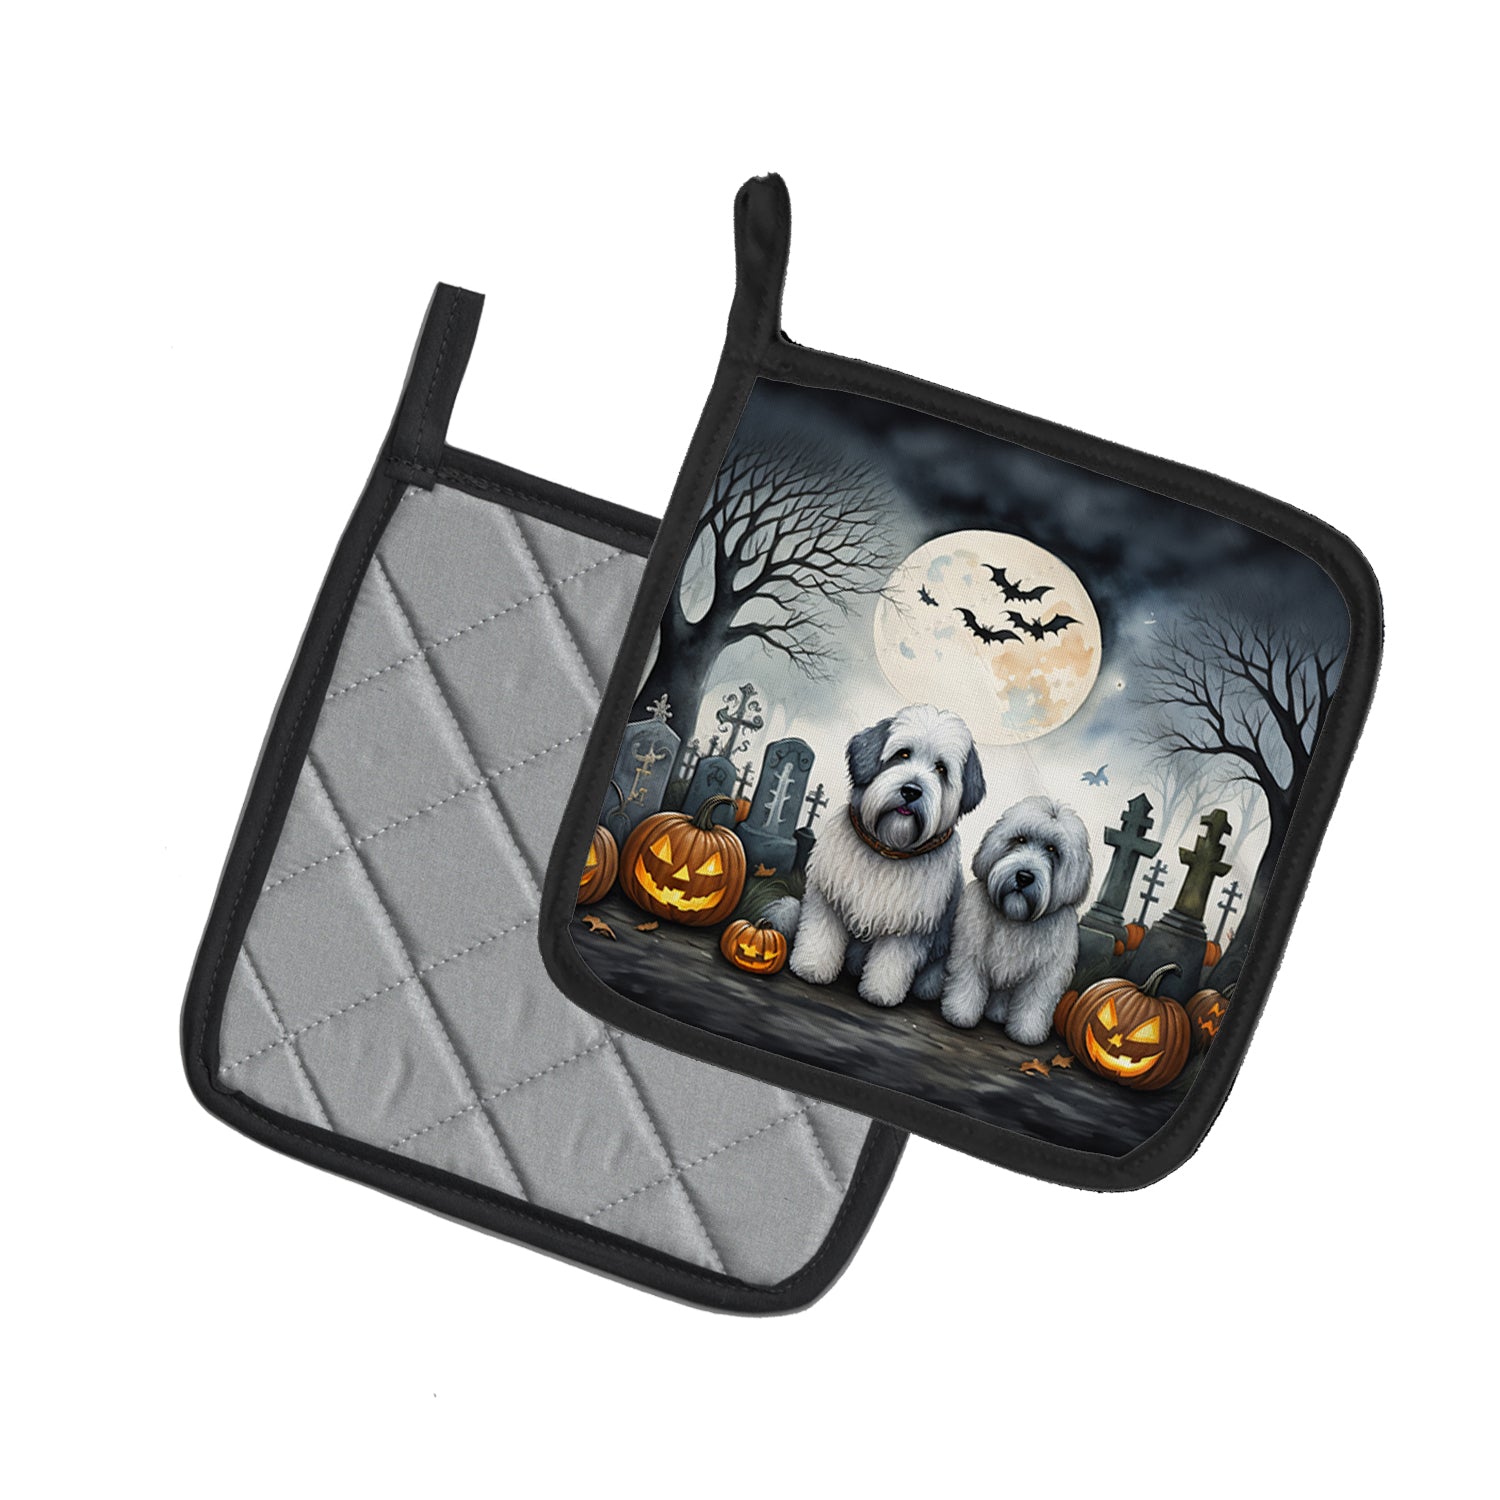 Old English Sheepdog Spooky Halloween Pair of Pot Holders